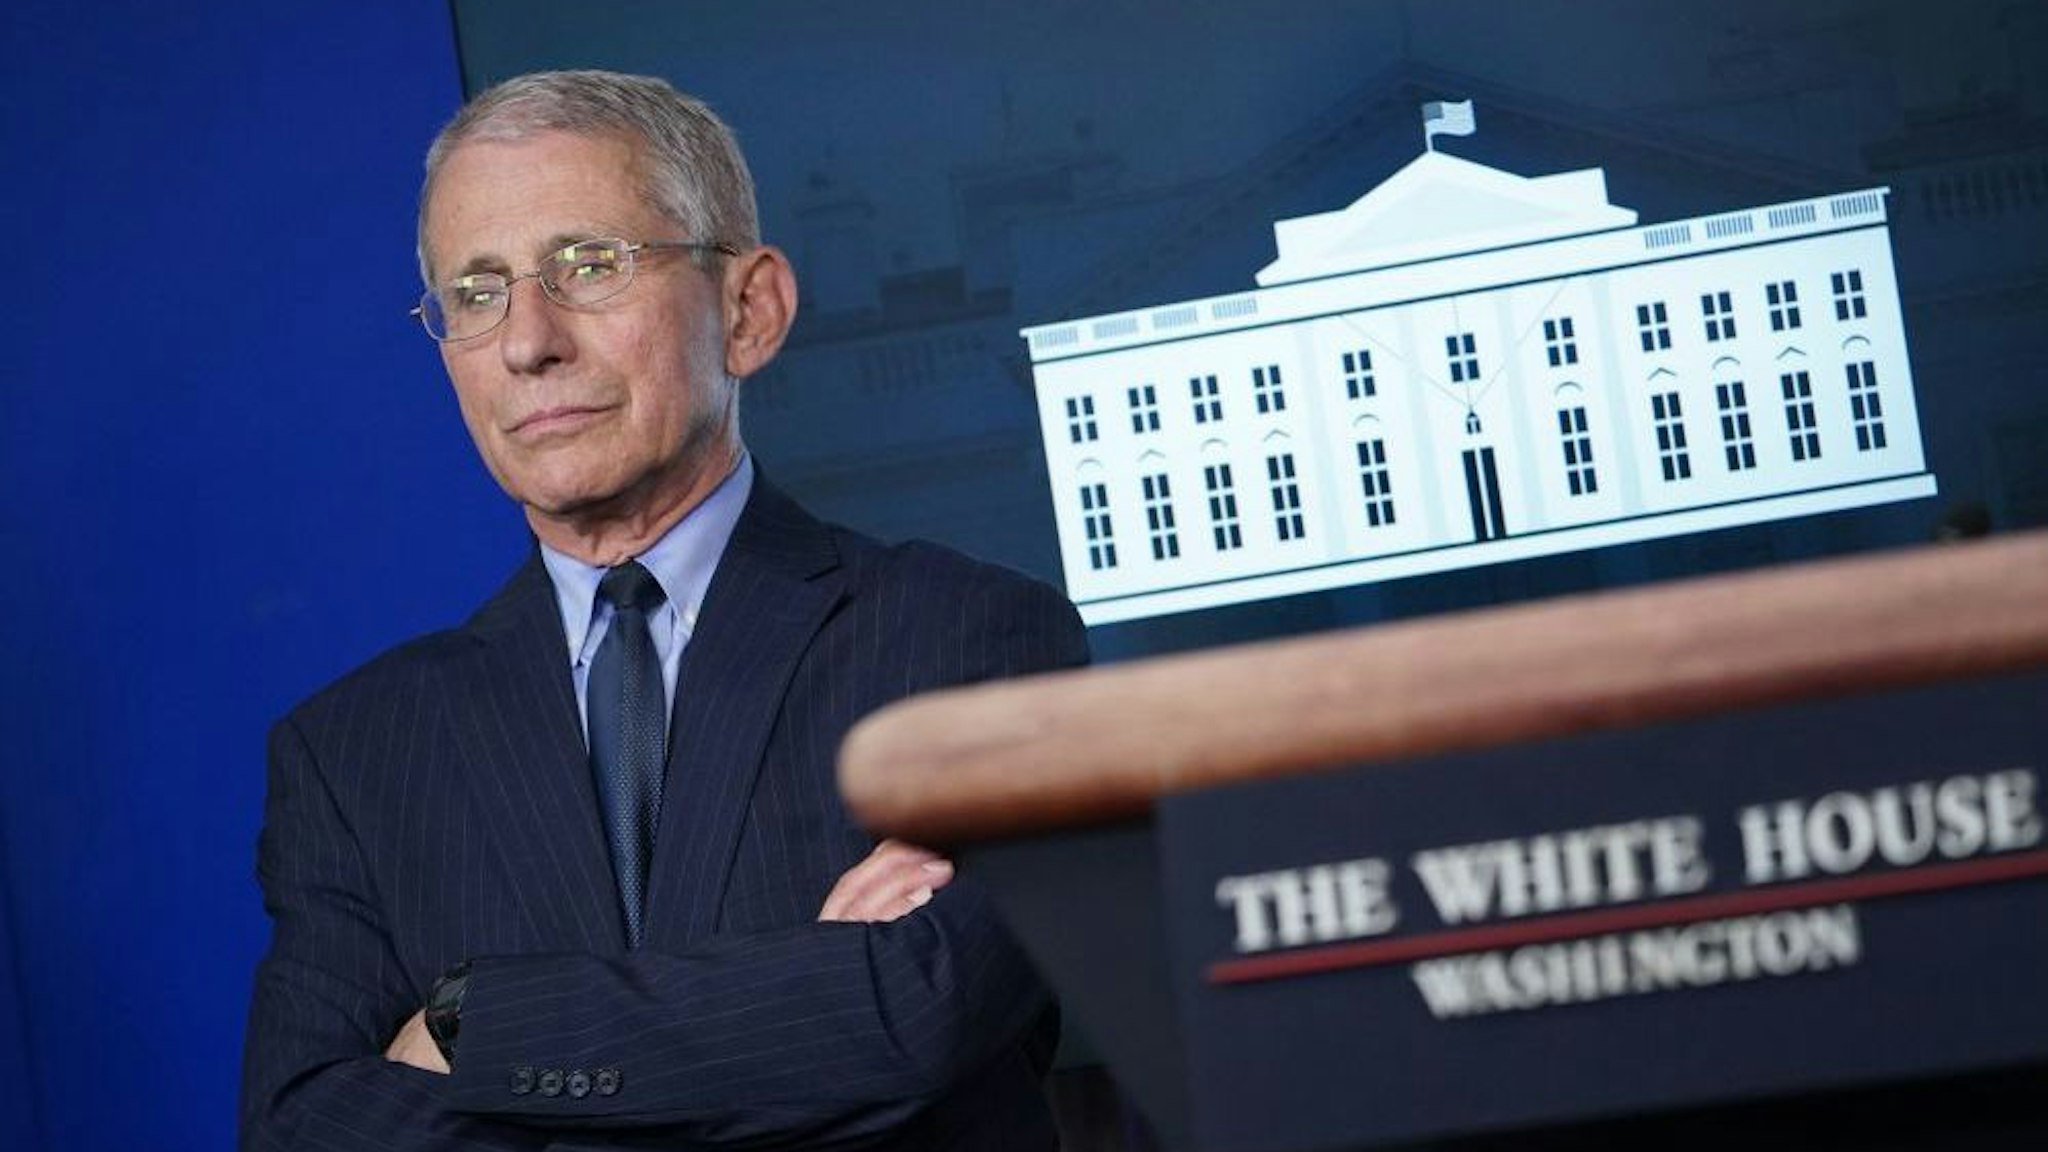 Director of the National Institute of Allergy and Infectious Diseases Anthony Fauci looks on during the daily briefing on the novel coronavirus, COVID-19, in the Brady Briefing Room at the White House on April 1, 2020, in Washington, DC. (Photo by Mandel NGAN / AFP)